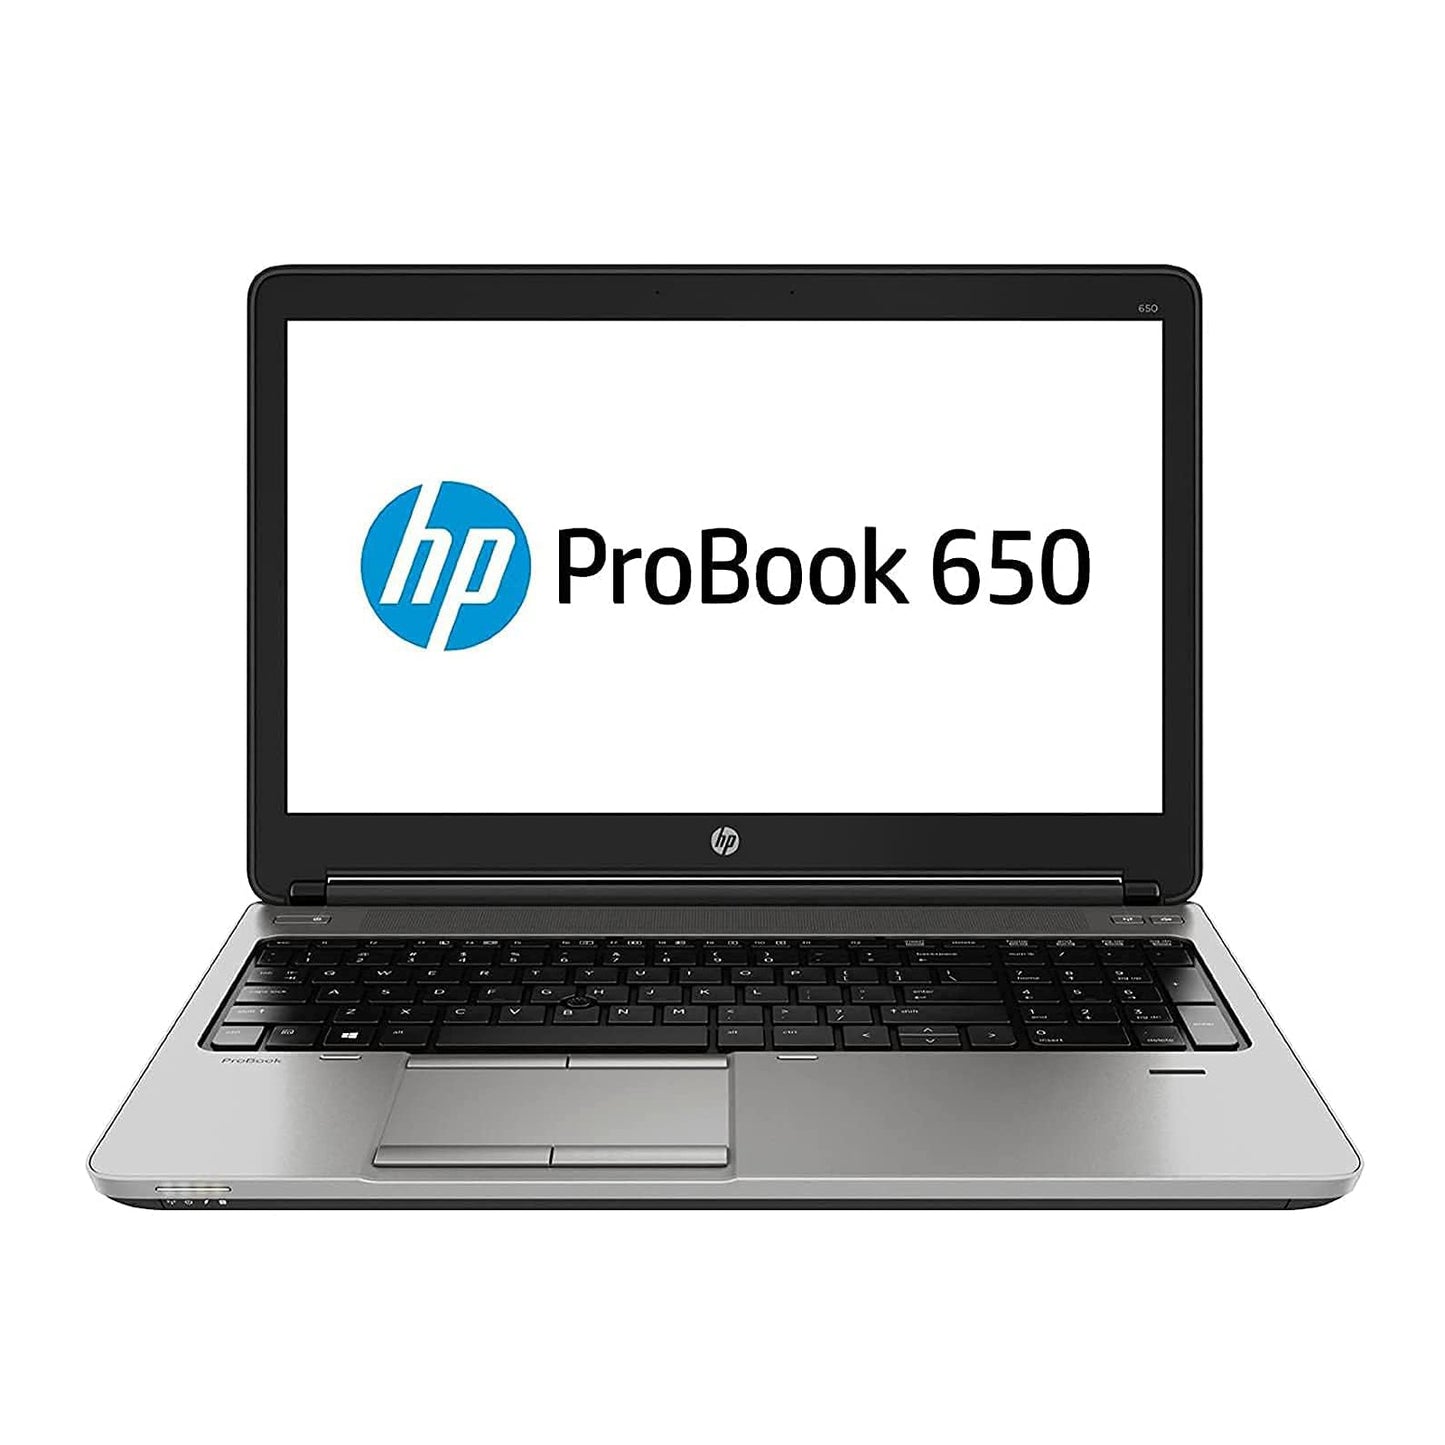 HP ProBook 650 Core i7 15-inch Laptop Offer (Used With Warranty)